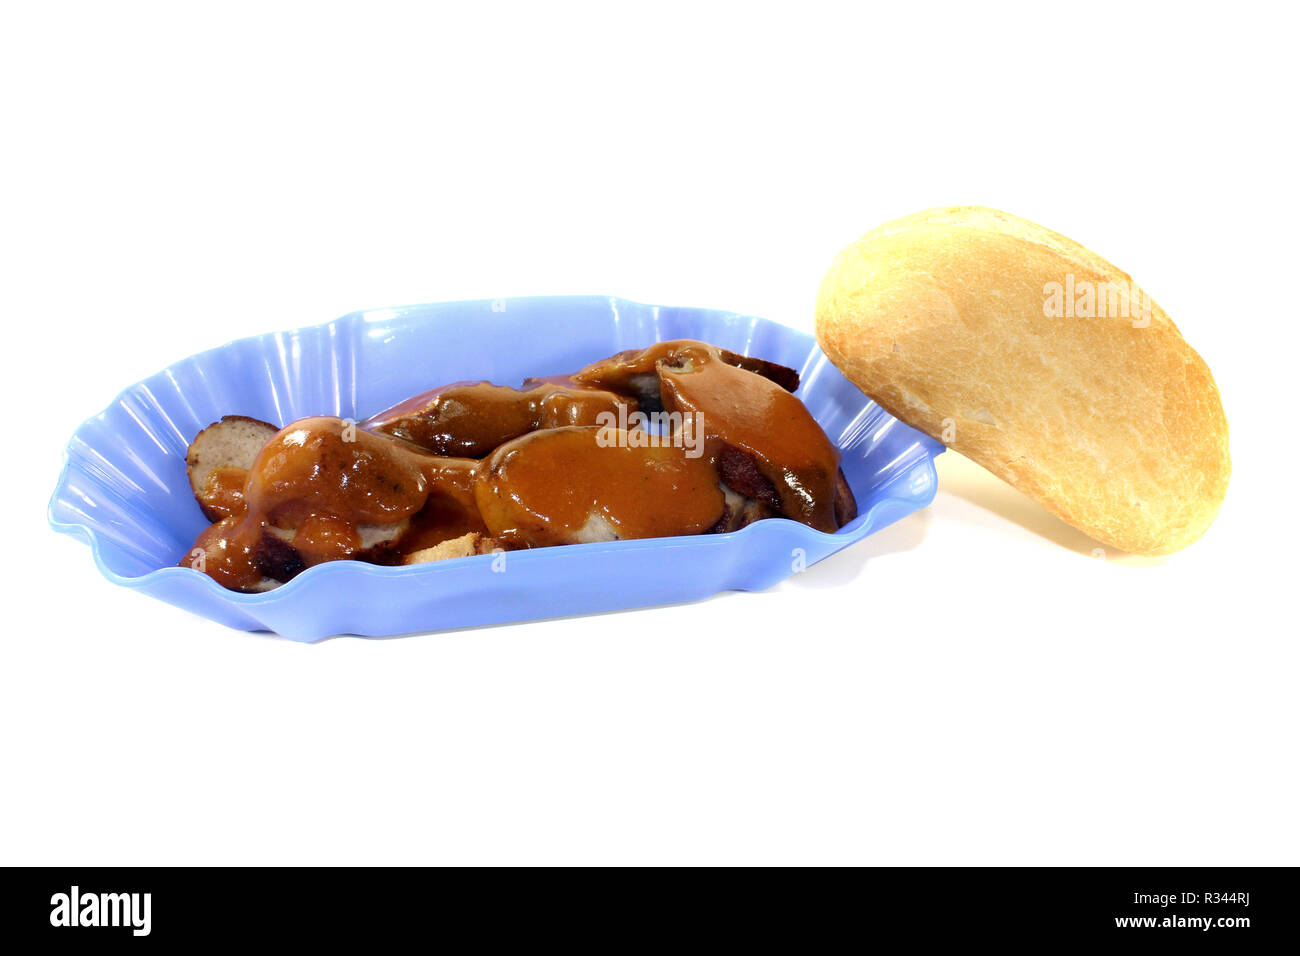 currywurst with bread in a bowl before light background Stock Photo